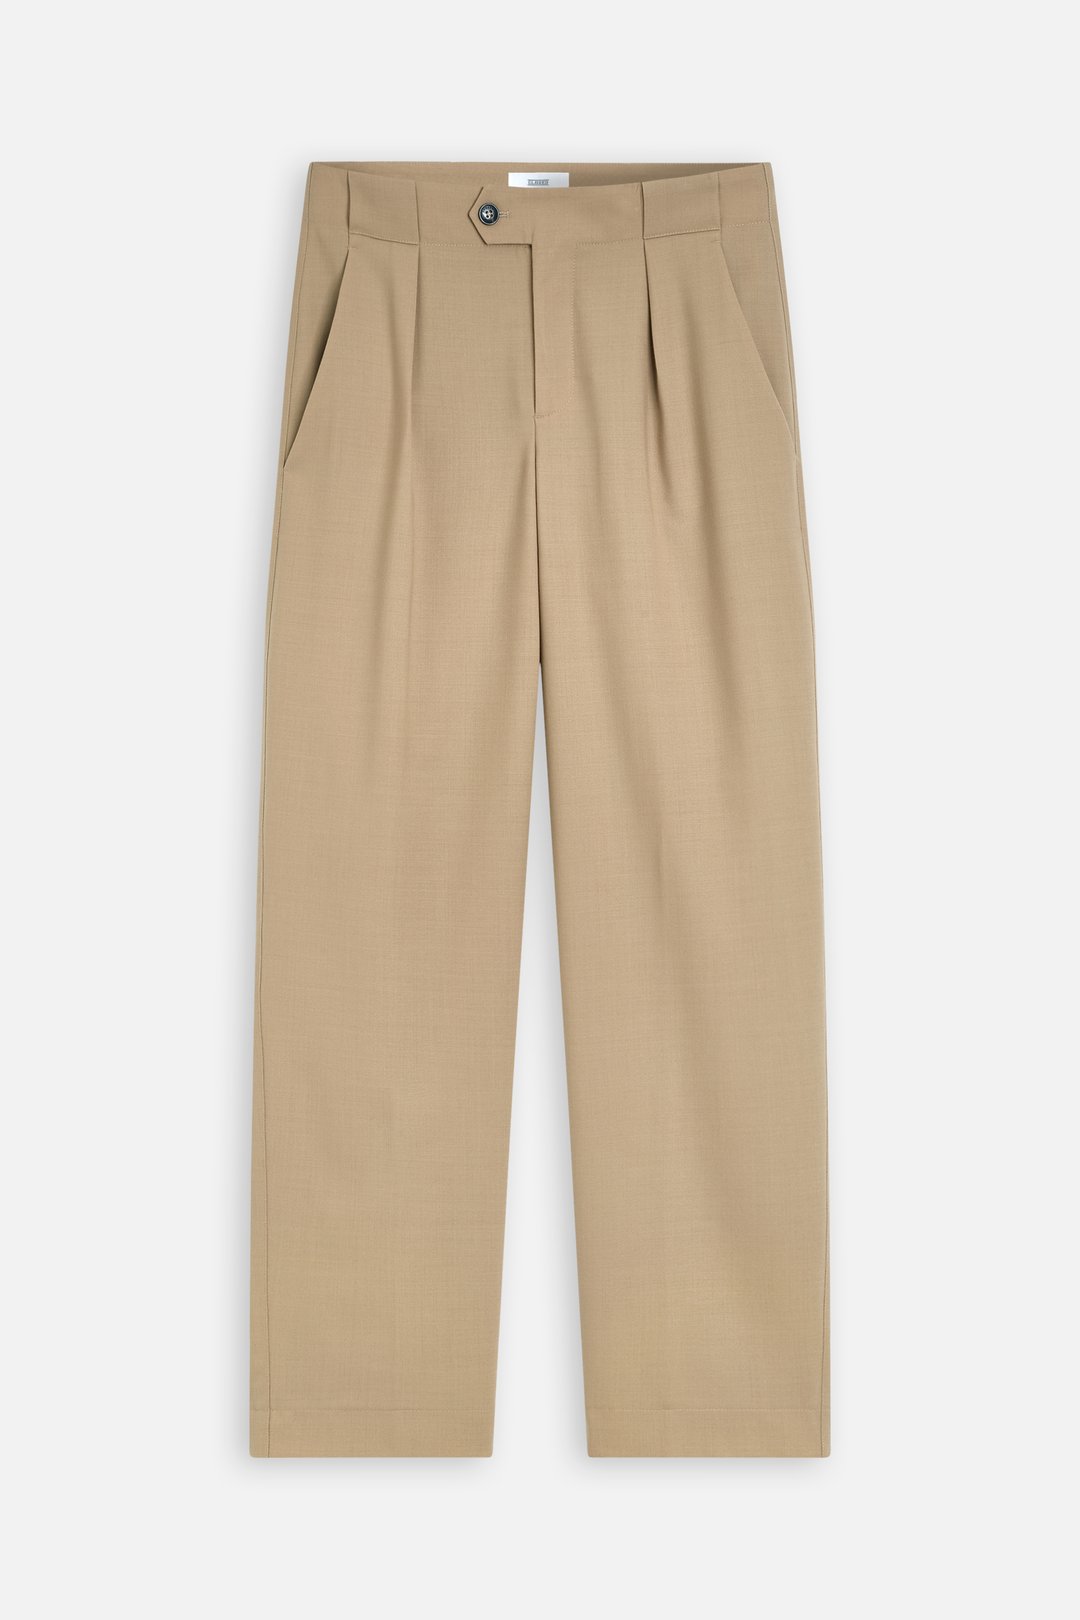 RELAXED PANTS - STYLE NAME MAWSON